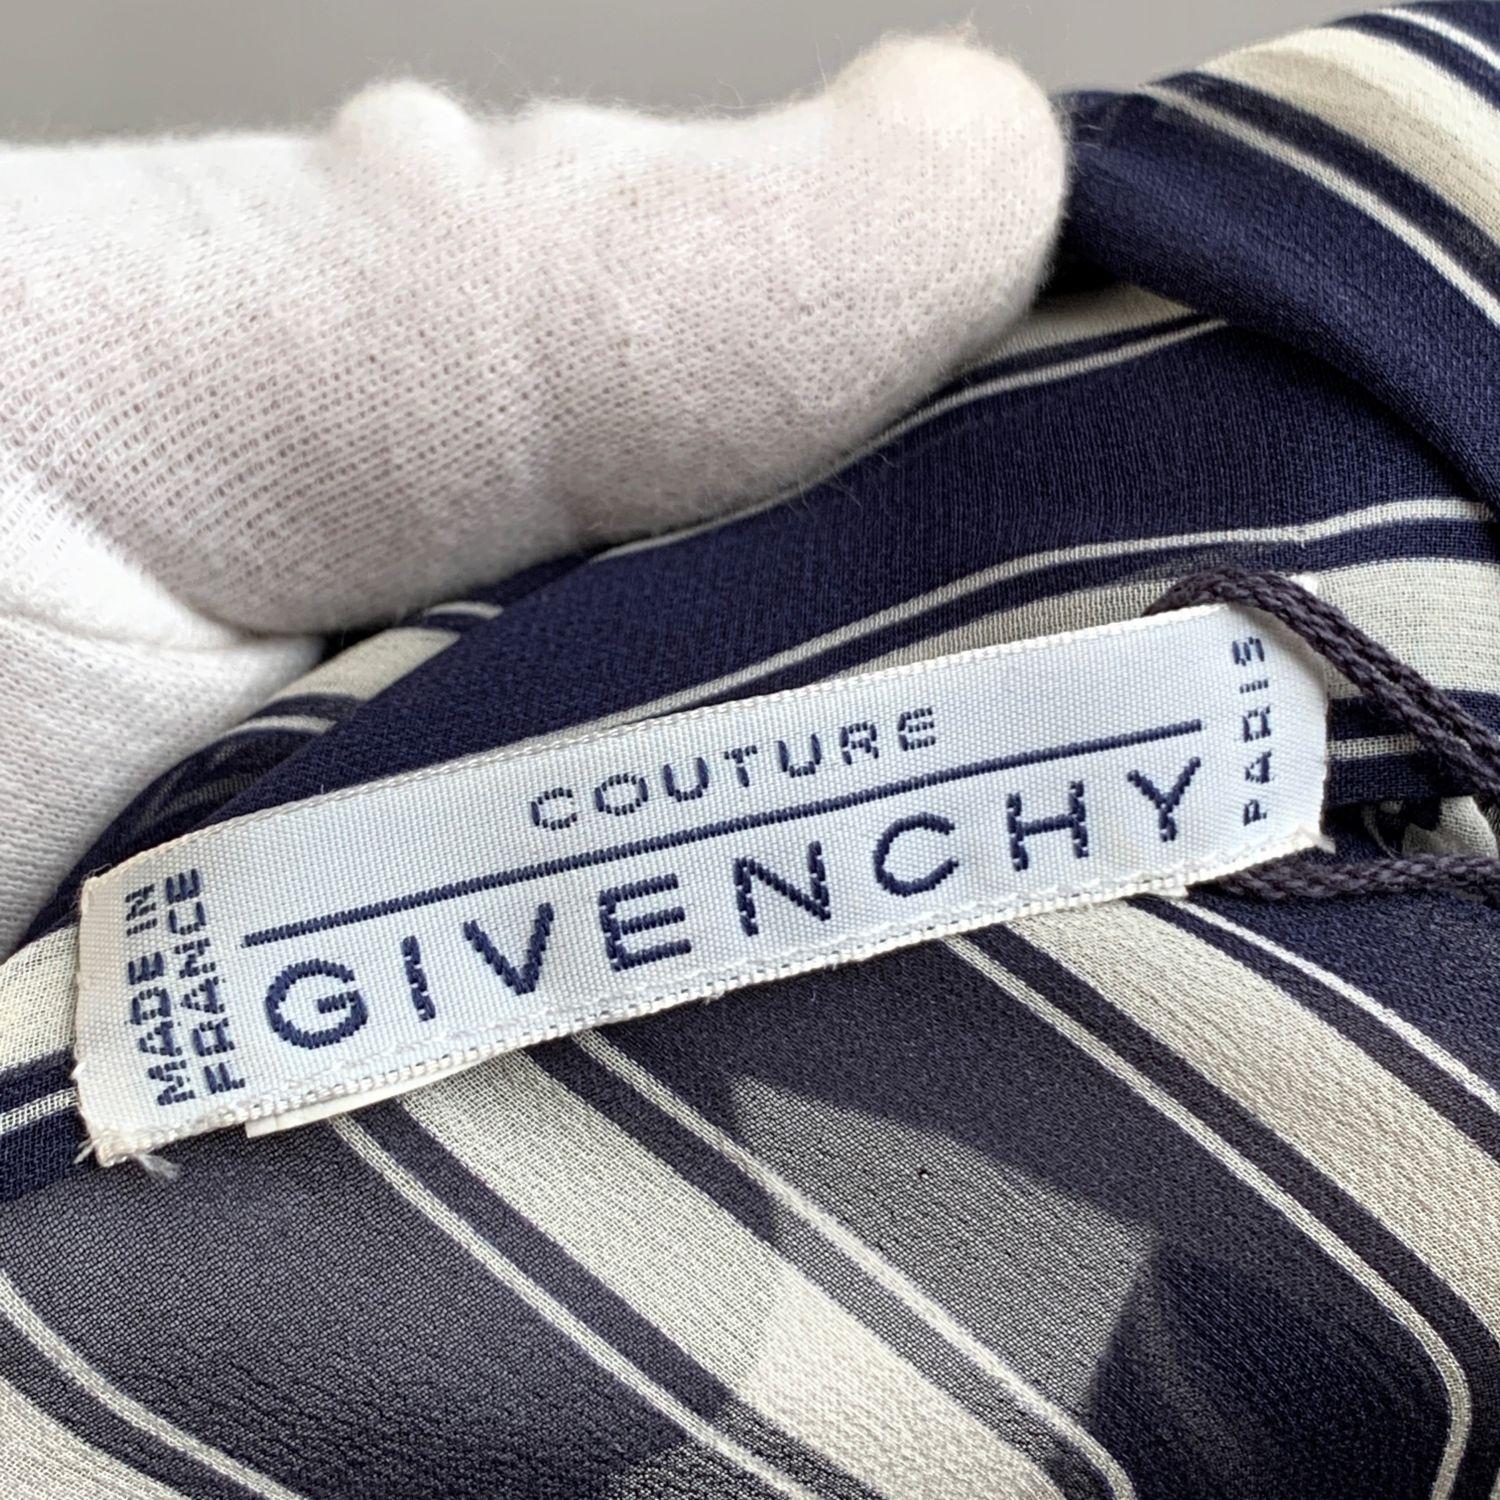 Vintage Givenchy Couture navy blue and white striped button down shirt in pure chiffon silk. It features pussybow detailing on the neckline, button closure on the front , long sleeve styling with zipped cuffs. Semi-sheer fabric. Composition:100%